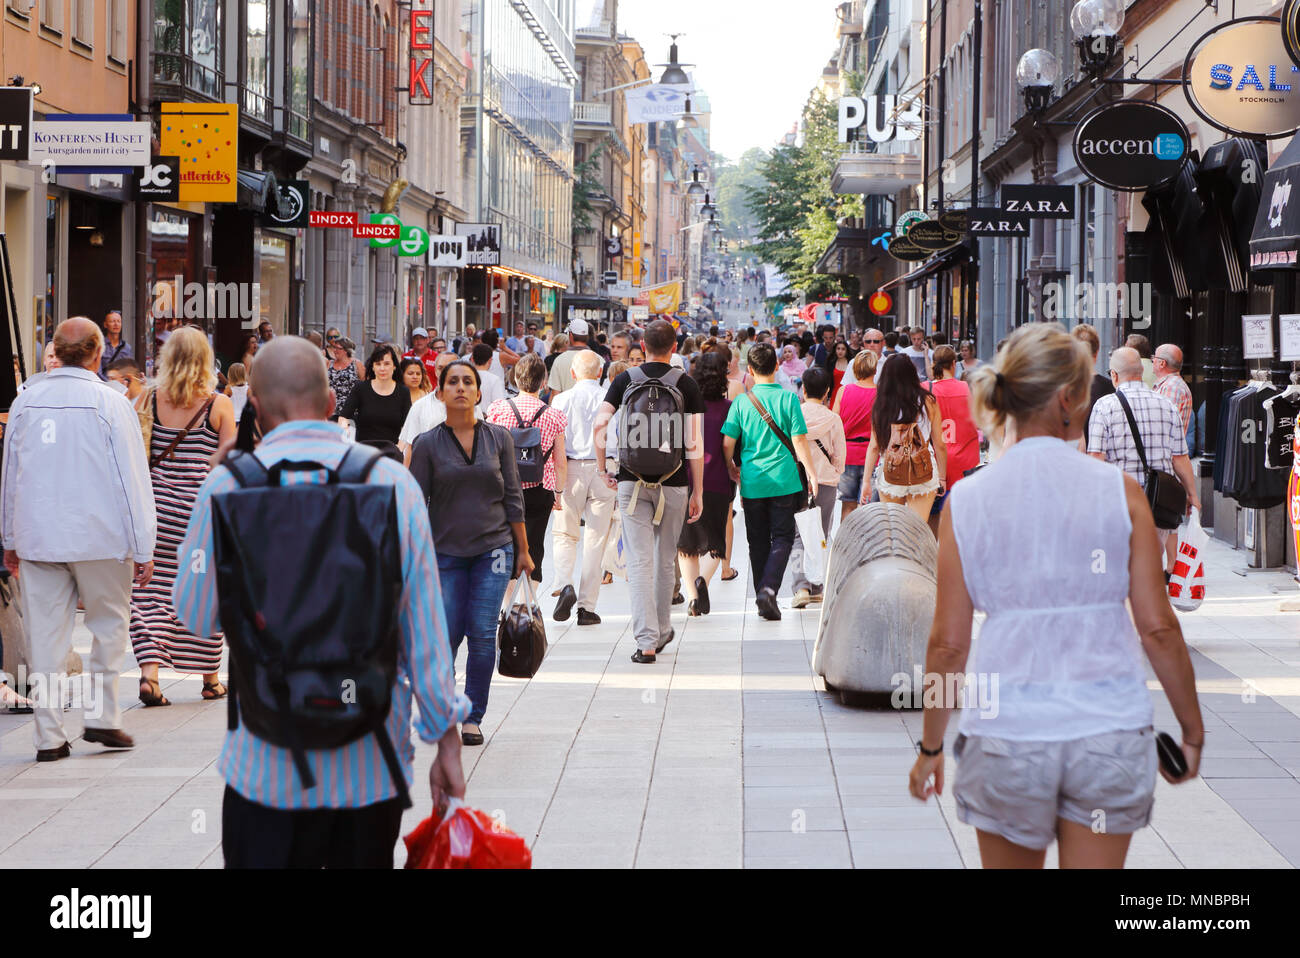 Stockholm, Sweden - August 4, 2014: People walking on the street Drottninggatan in downtown Stockholm. Stock Photo